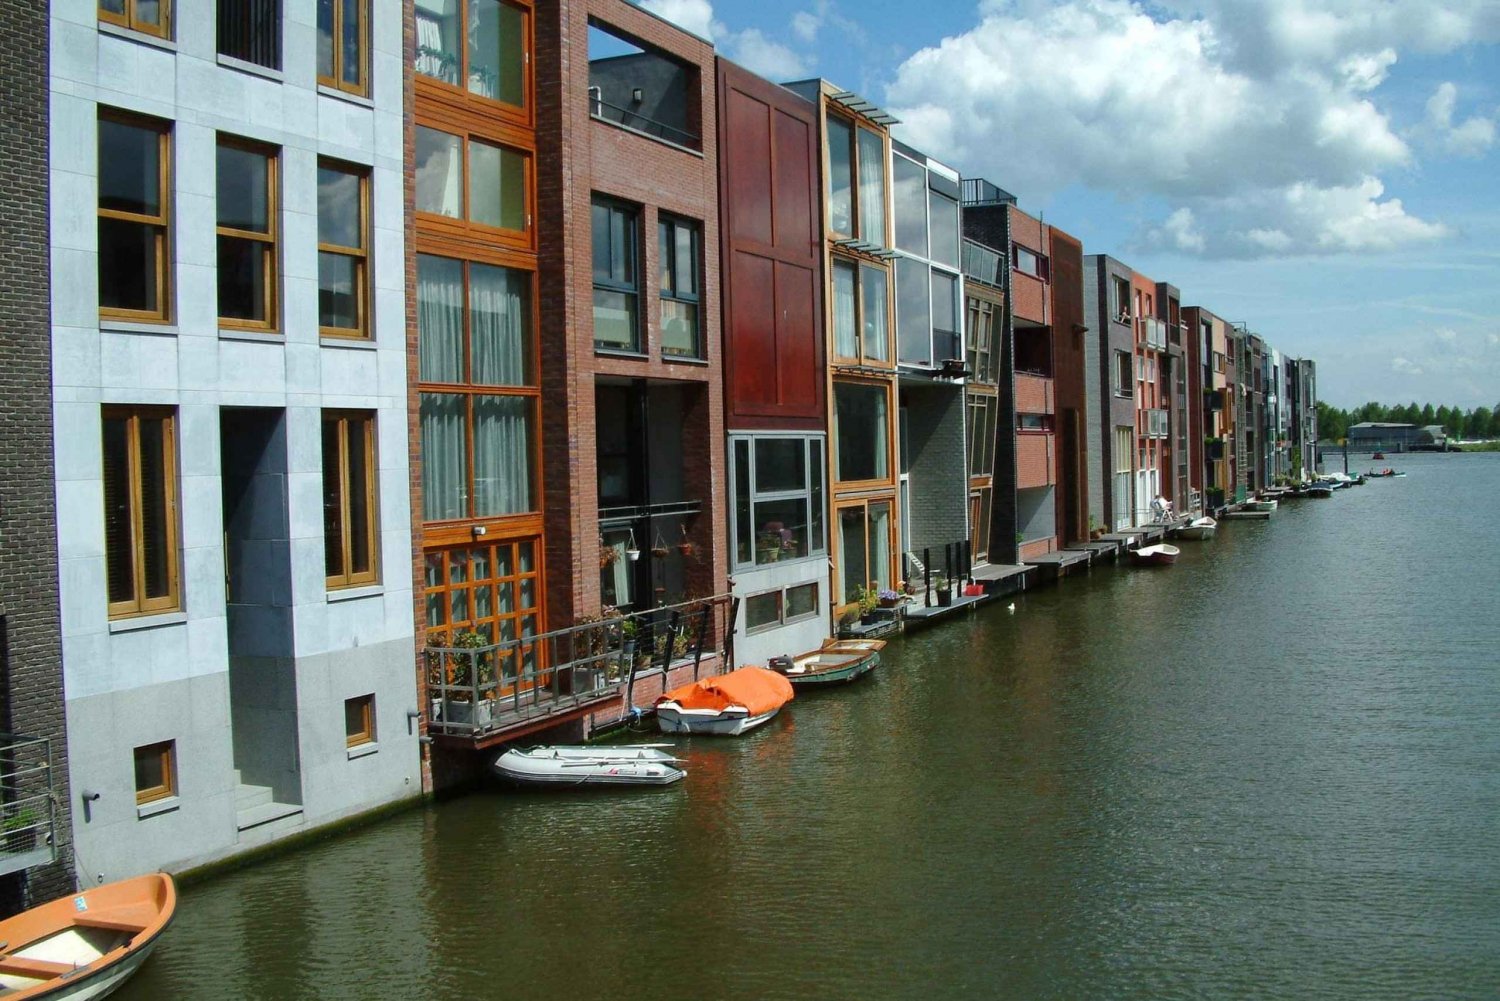 Amsterdam, Eastern Docklands Architecture: Privat tur